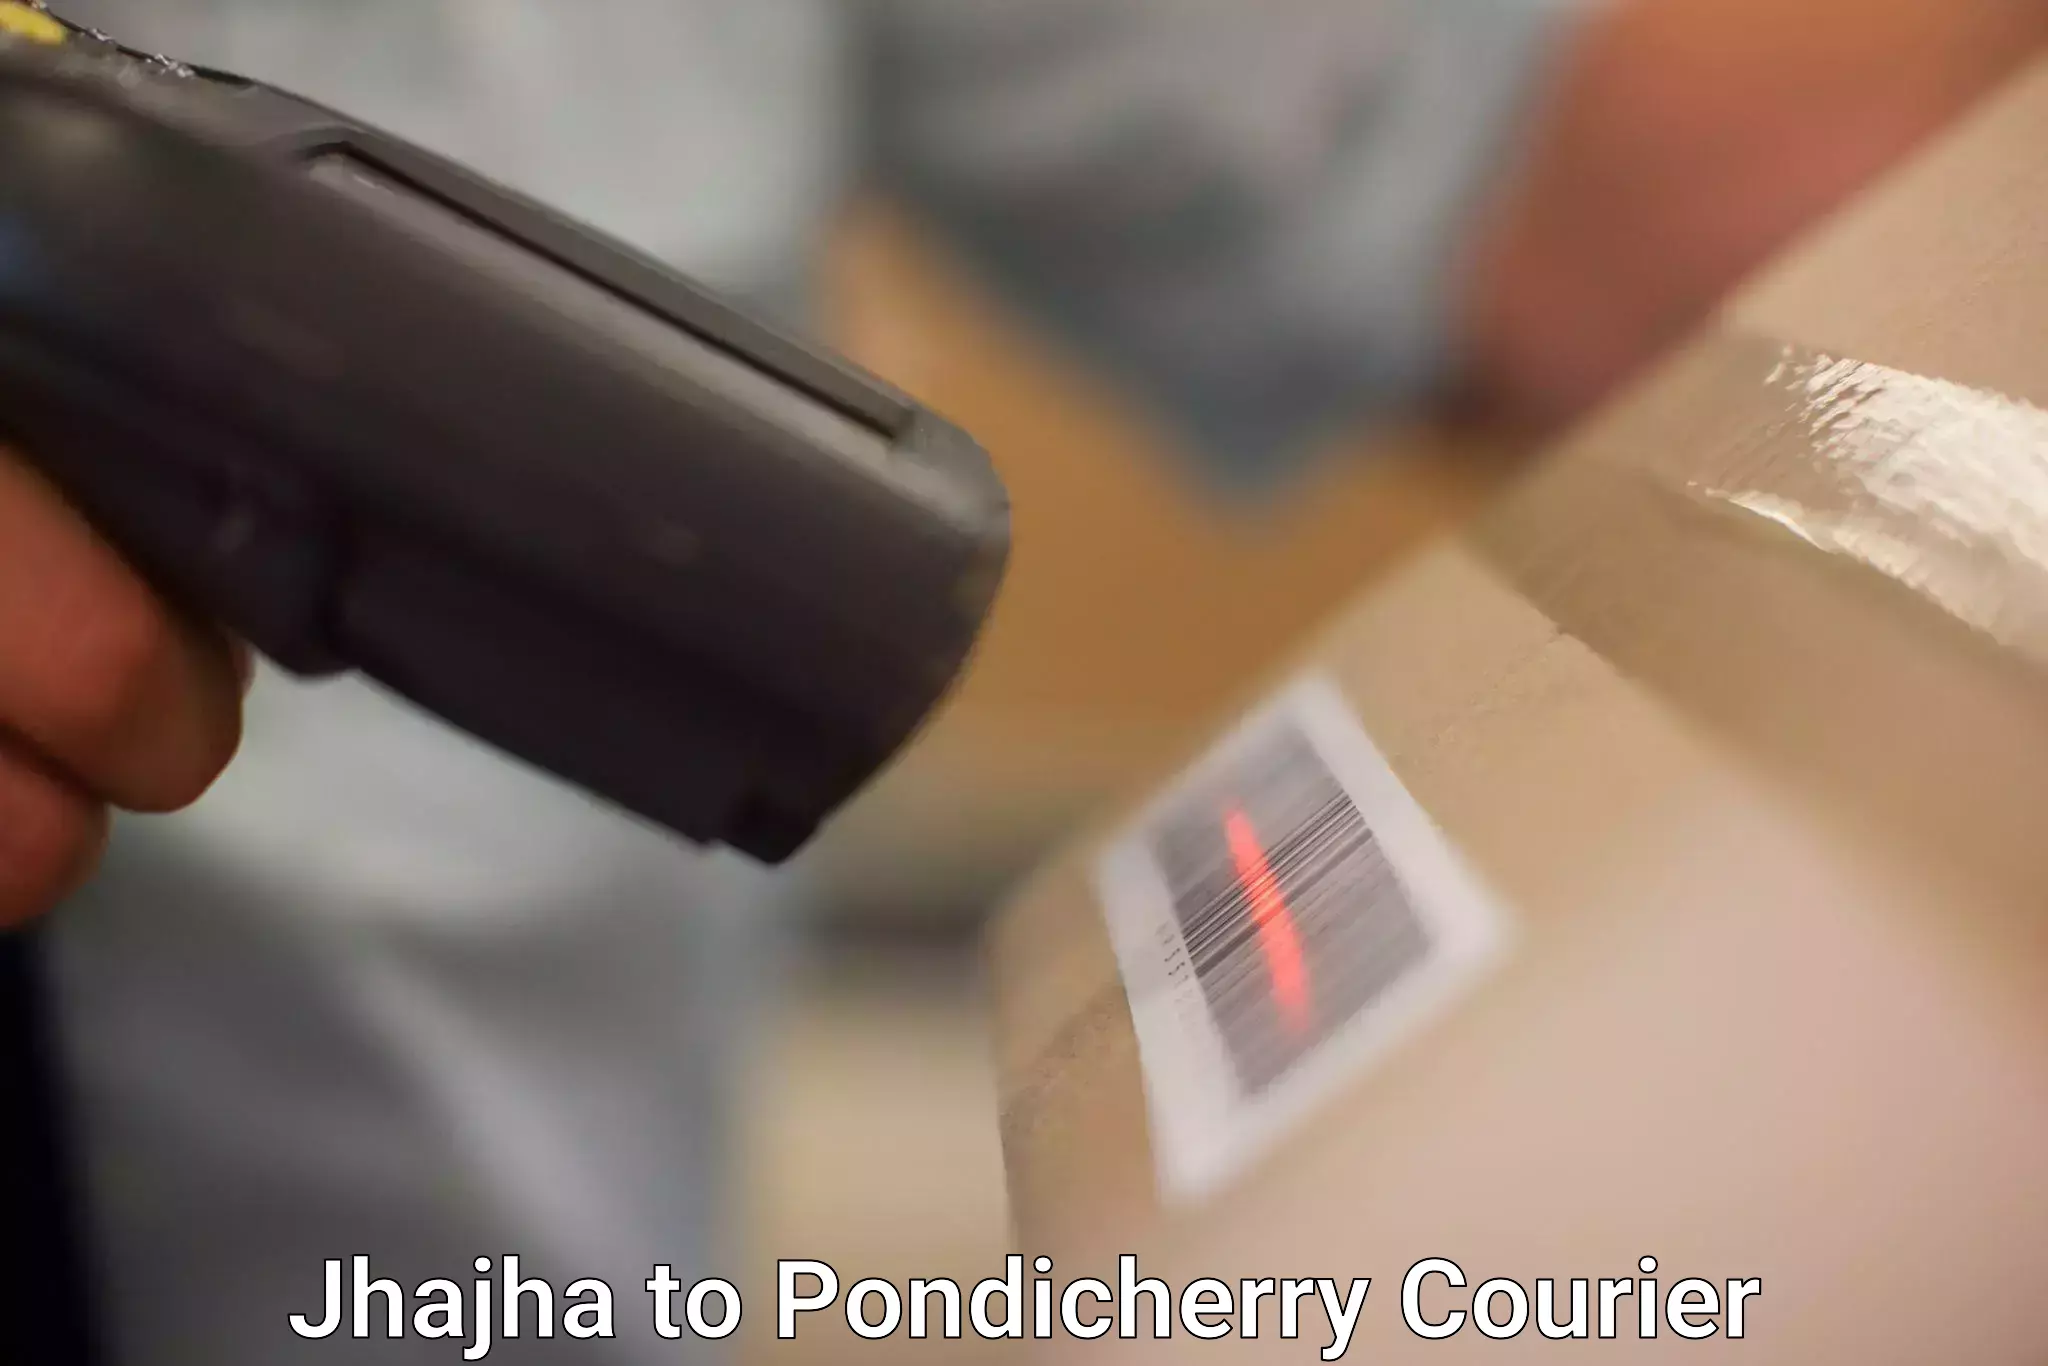 Global courier networks Jhajha to Pondicherry